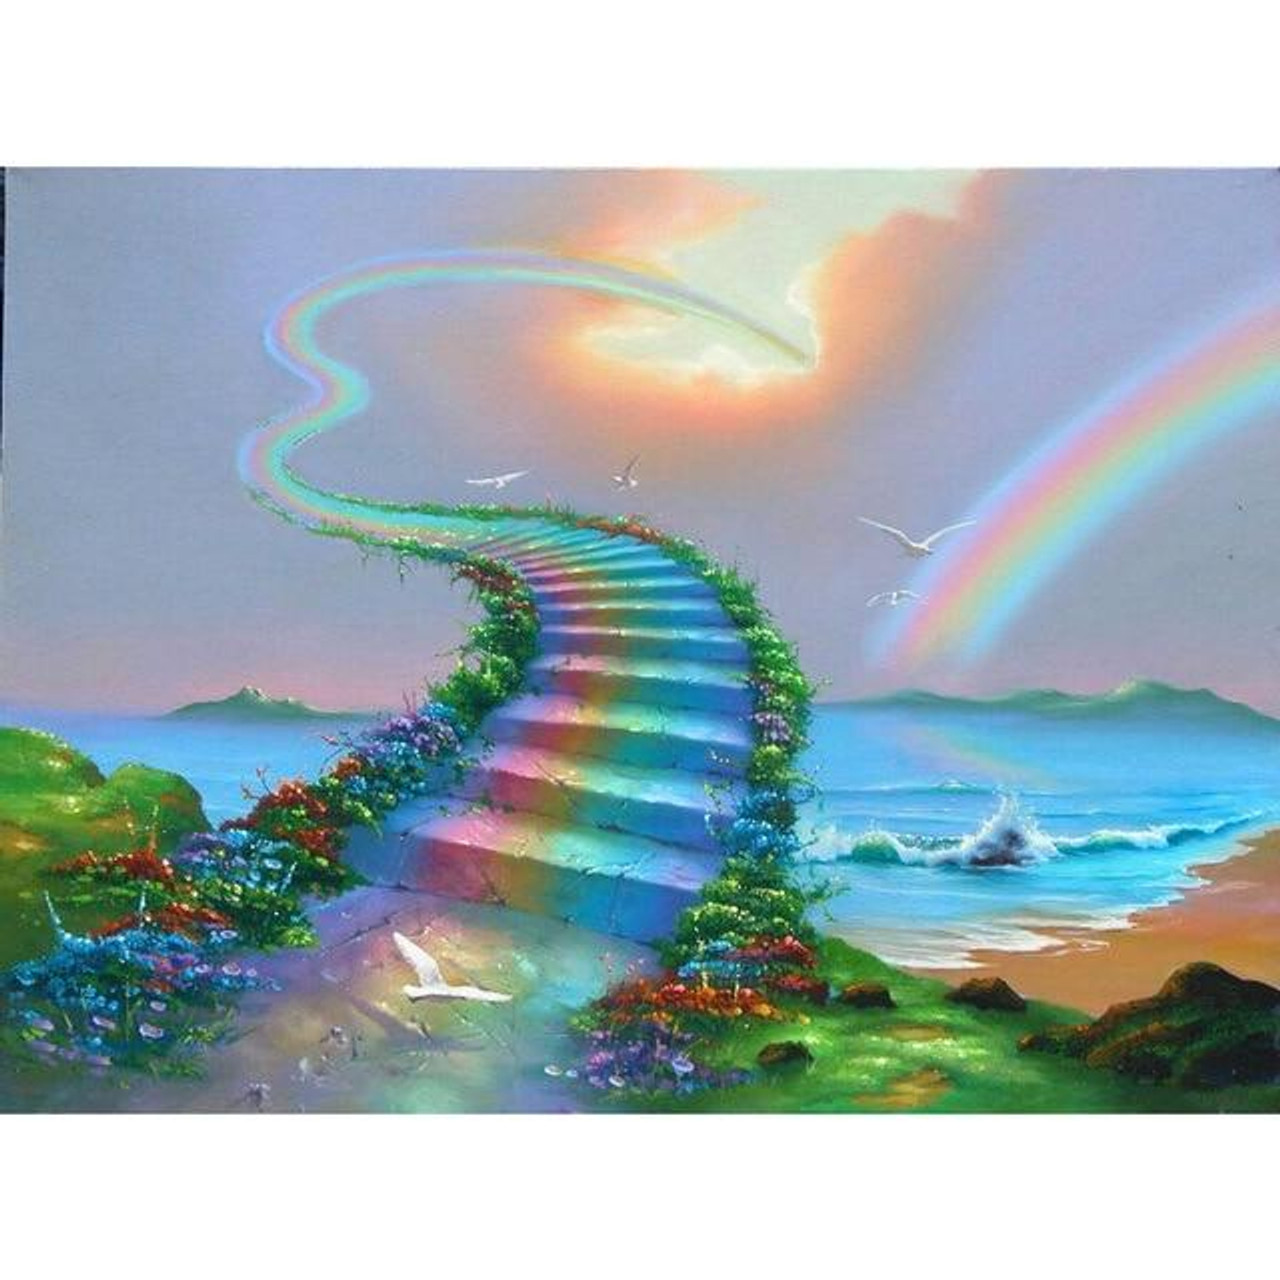 stairs to heaven painting